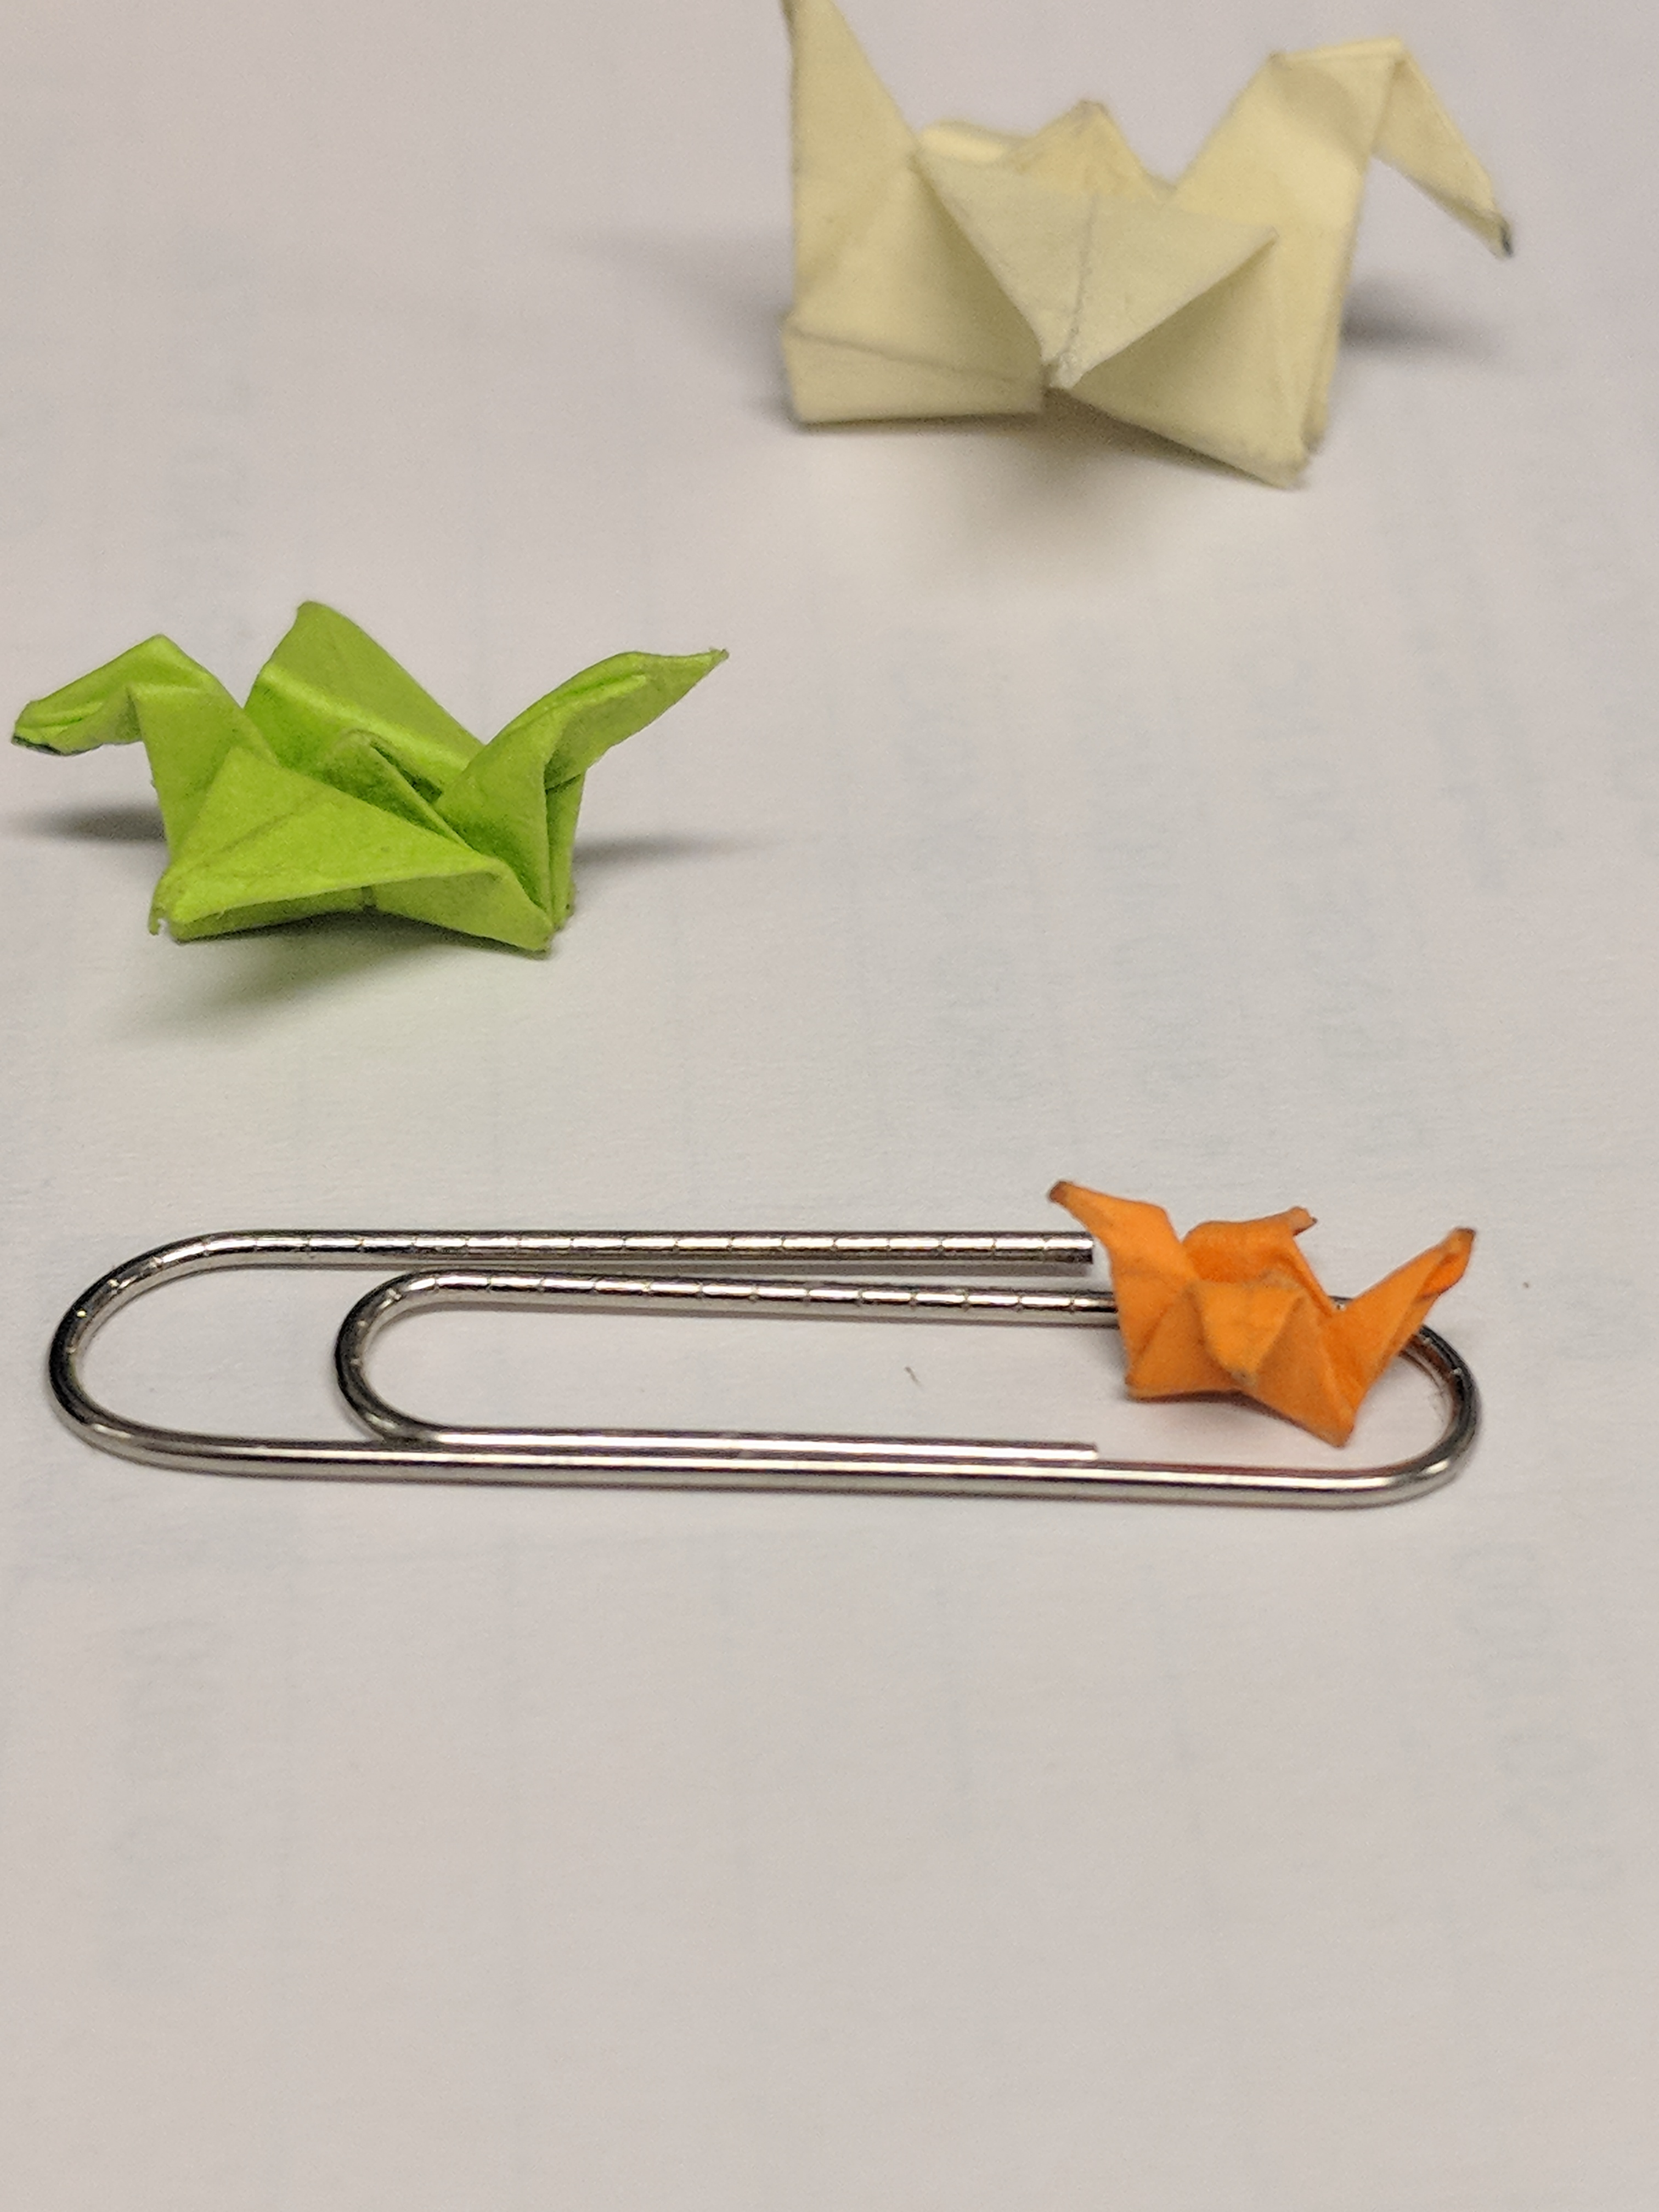 What Is Origamy What Is This Origami For Ants Album On Imgur